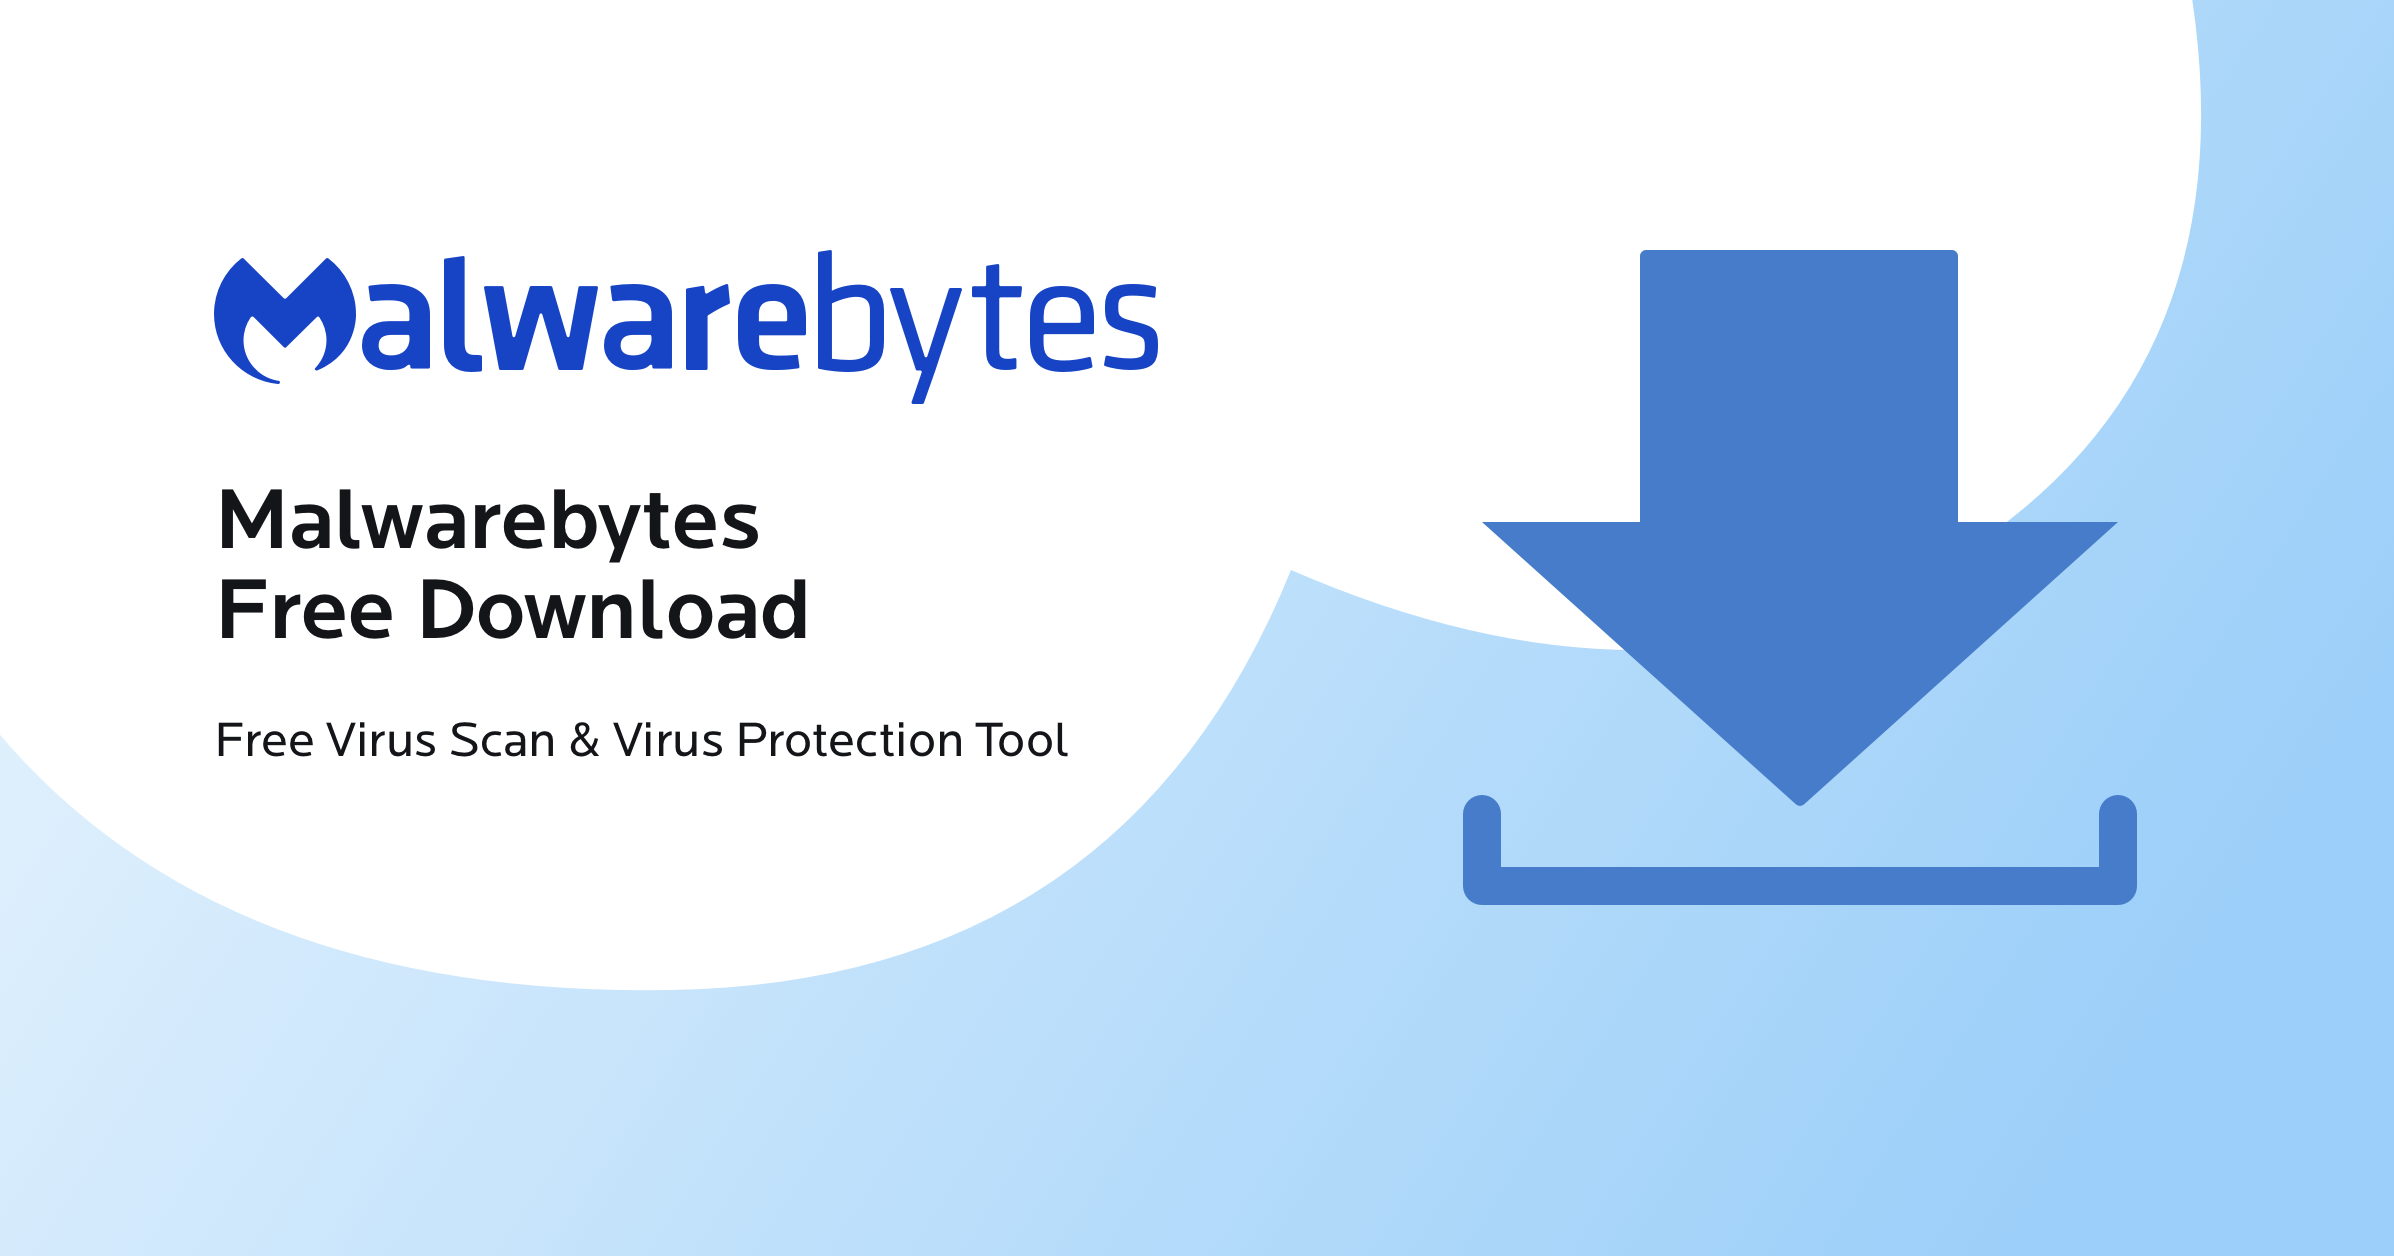 Download and install a reputable anti-malware program
Update the anti-malware program's database